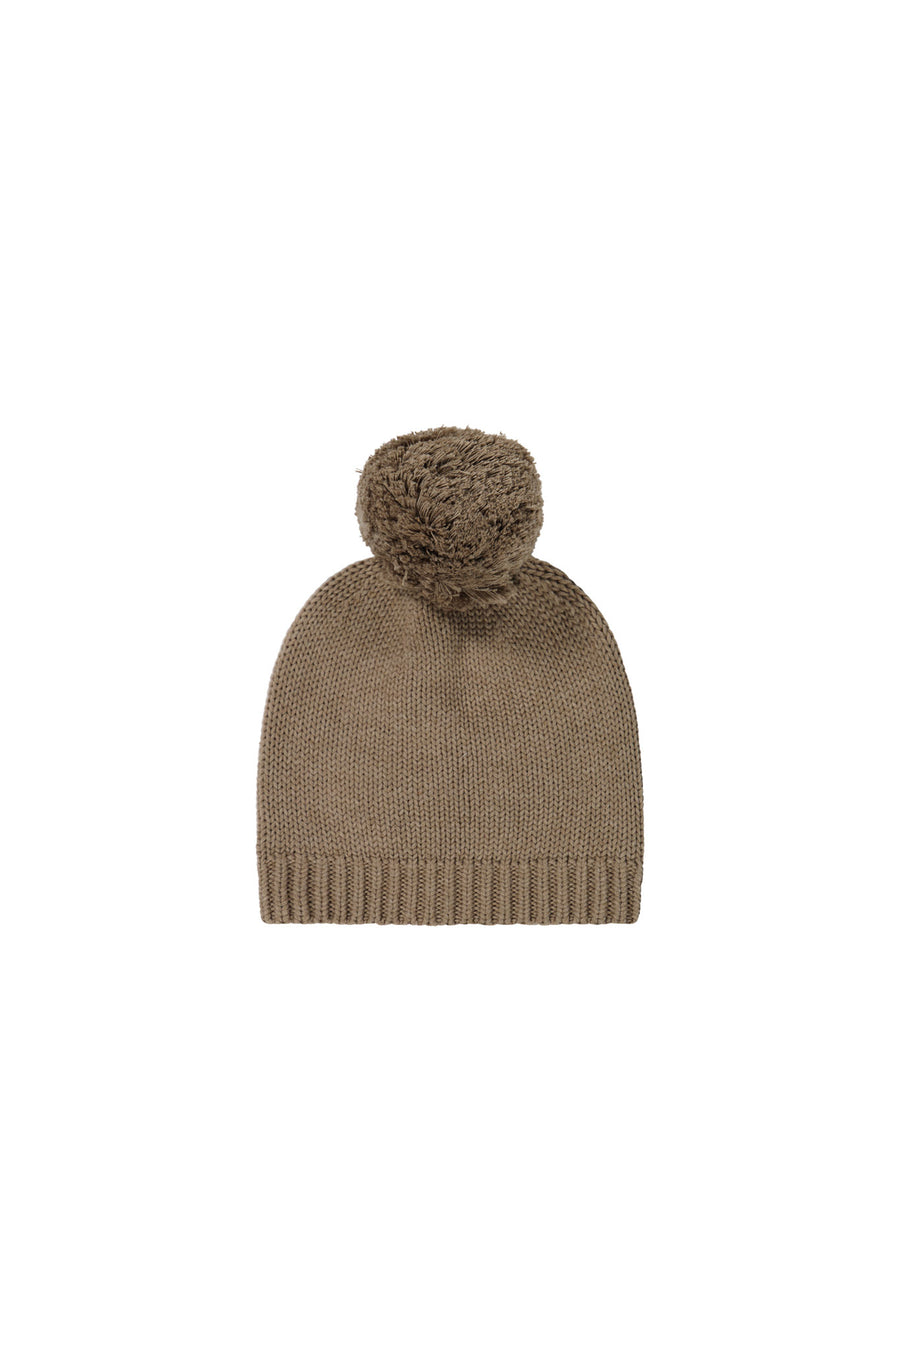 Ethan Hat - Doe Marle Childrens Hat from Jamie Kay NZ